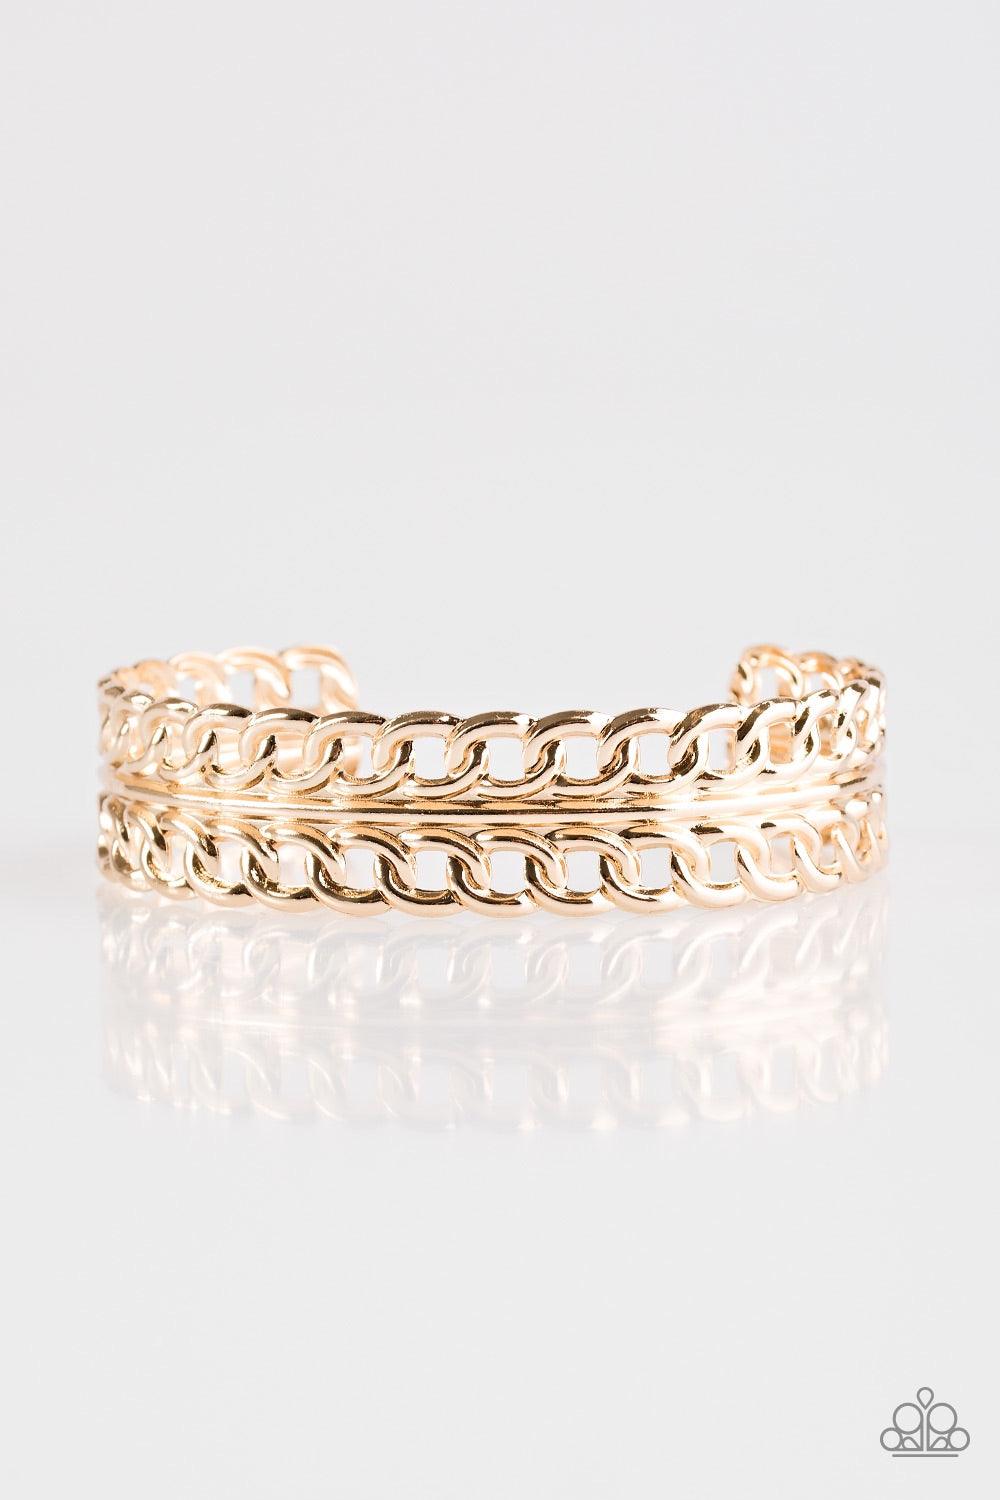 Paparazzi Accessories Progressive Movement - Gold Glistening rows of silver chain link stack across the wrist, coalescing into a bold industrial cuff. Jewelry